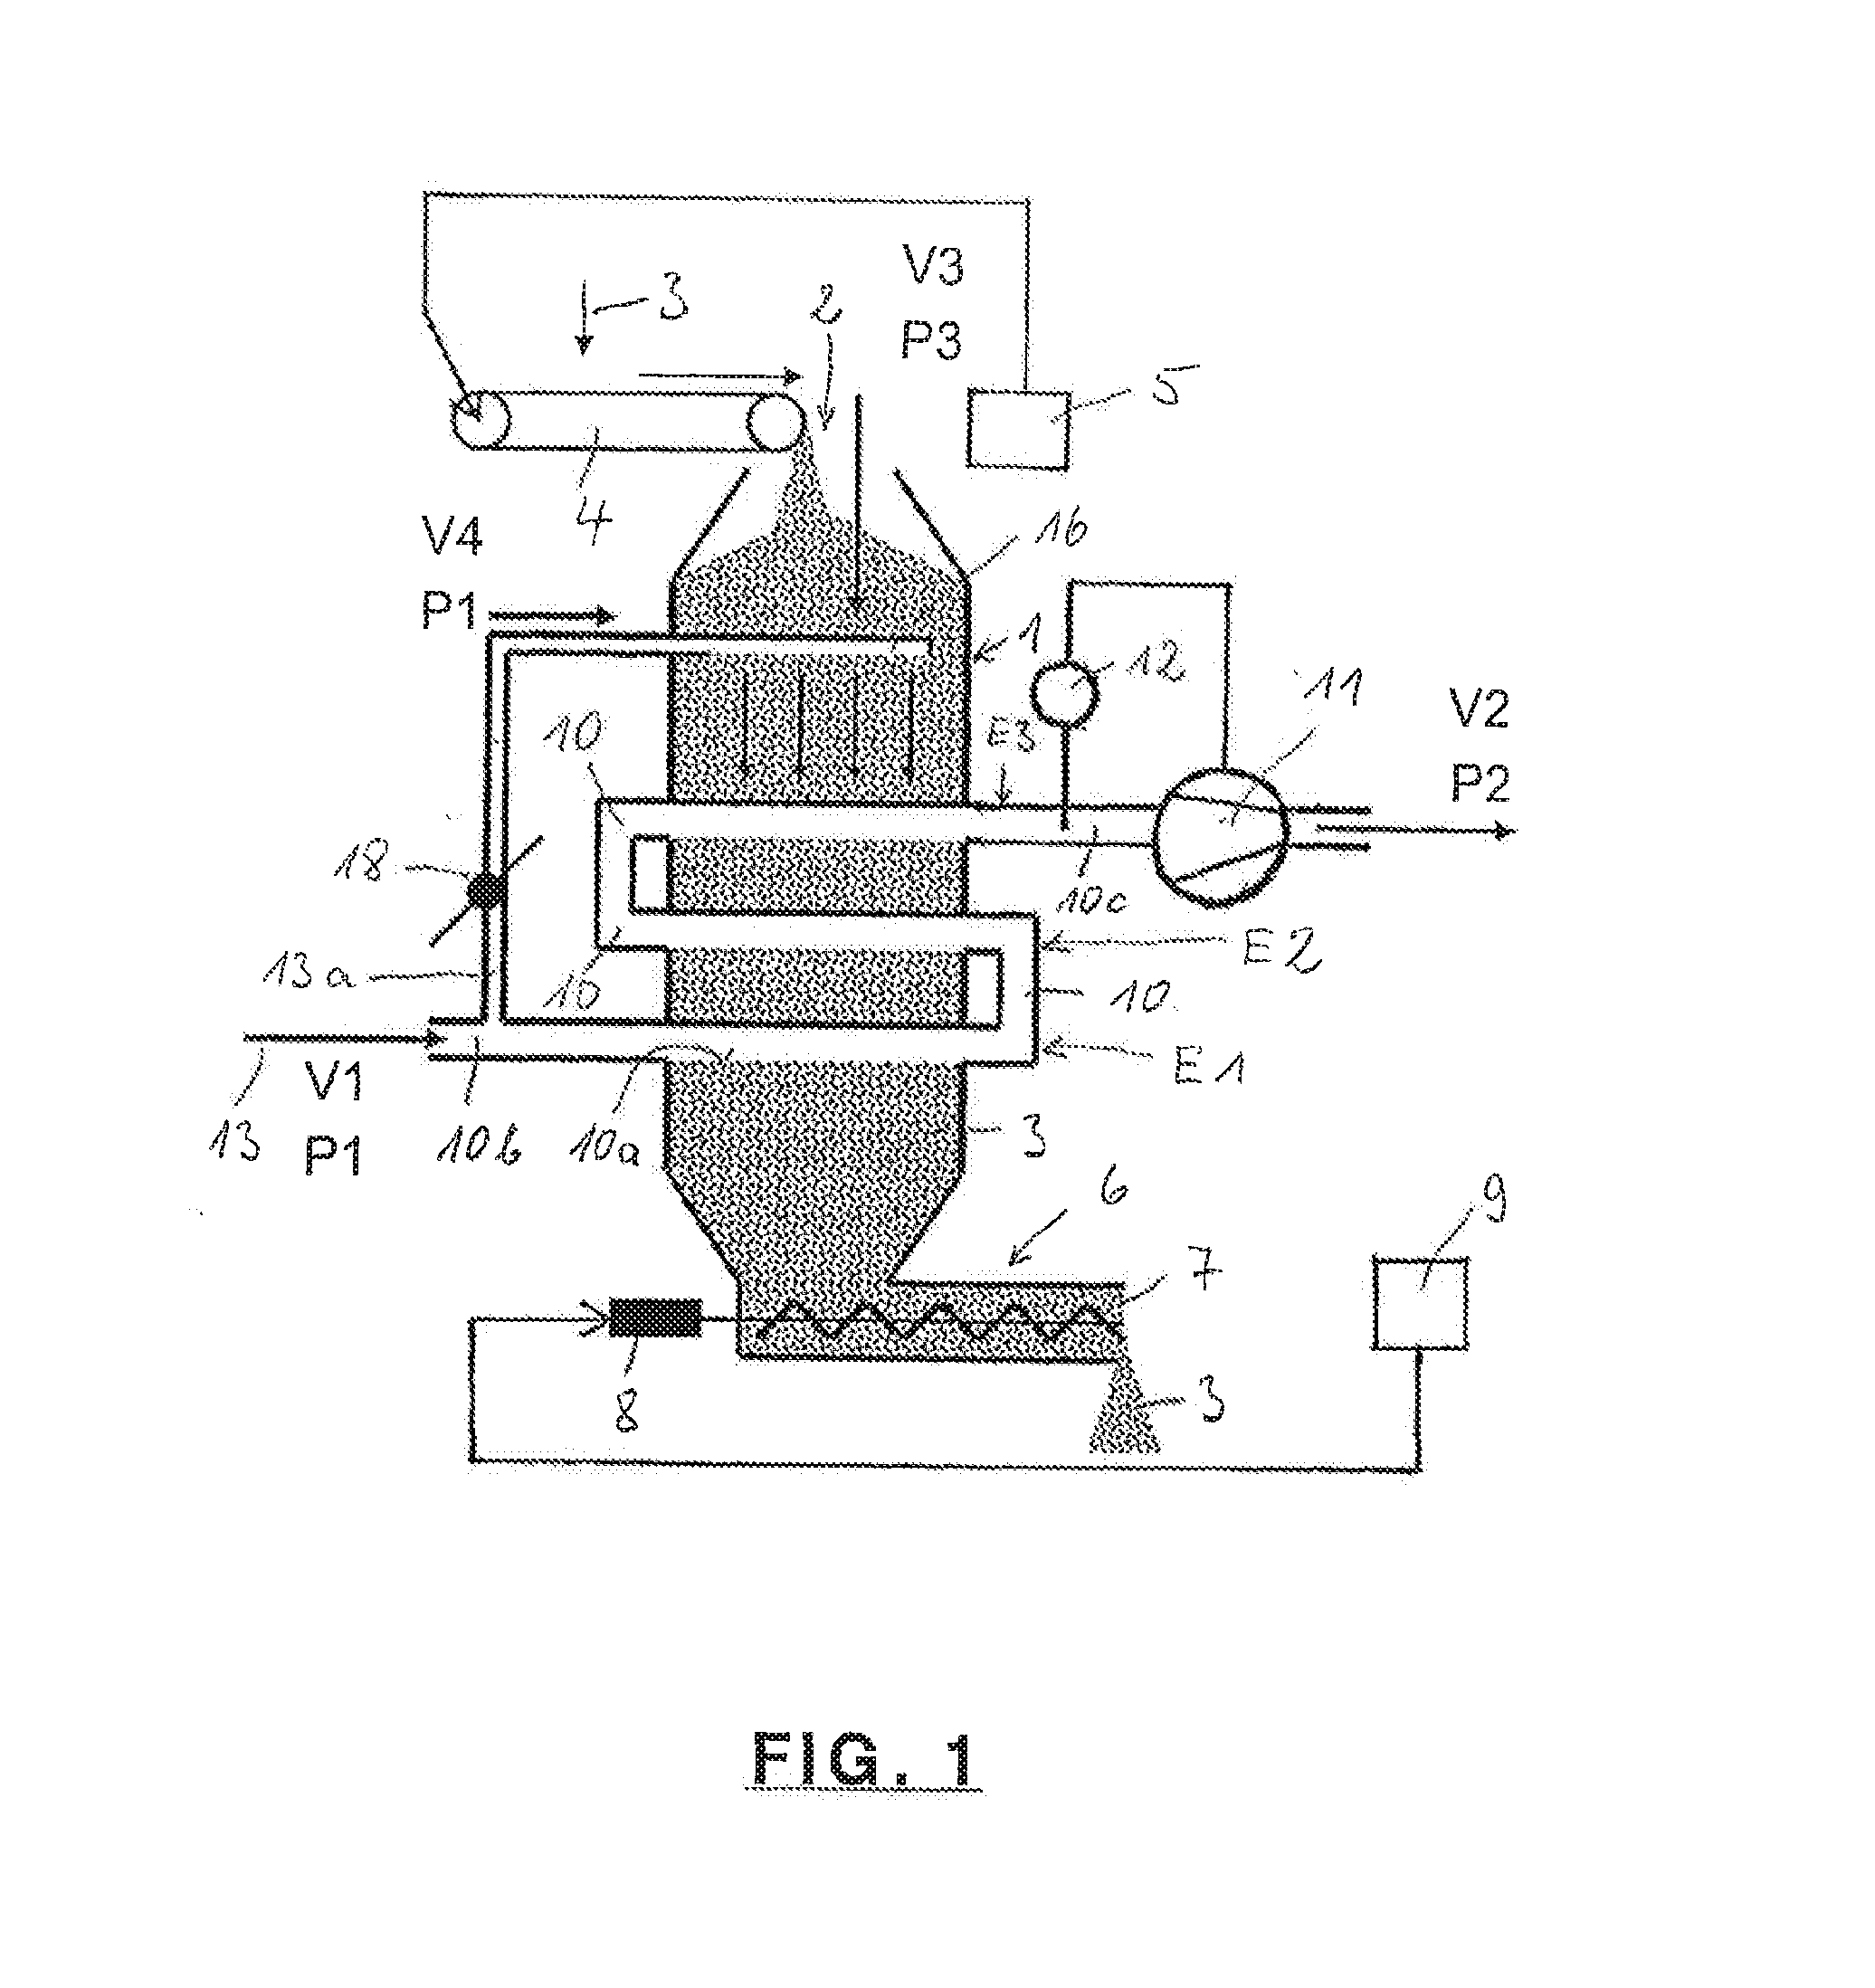 Device for preheating charging materials for glass melting facilities